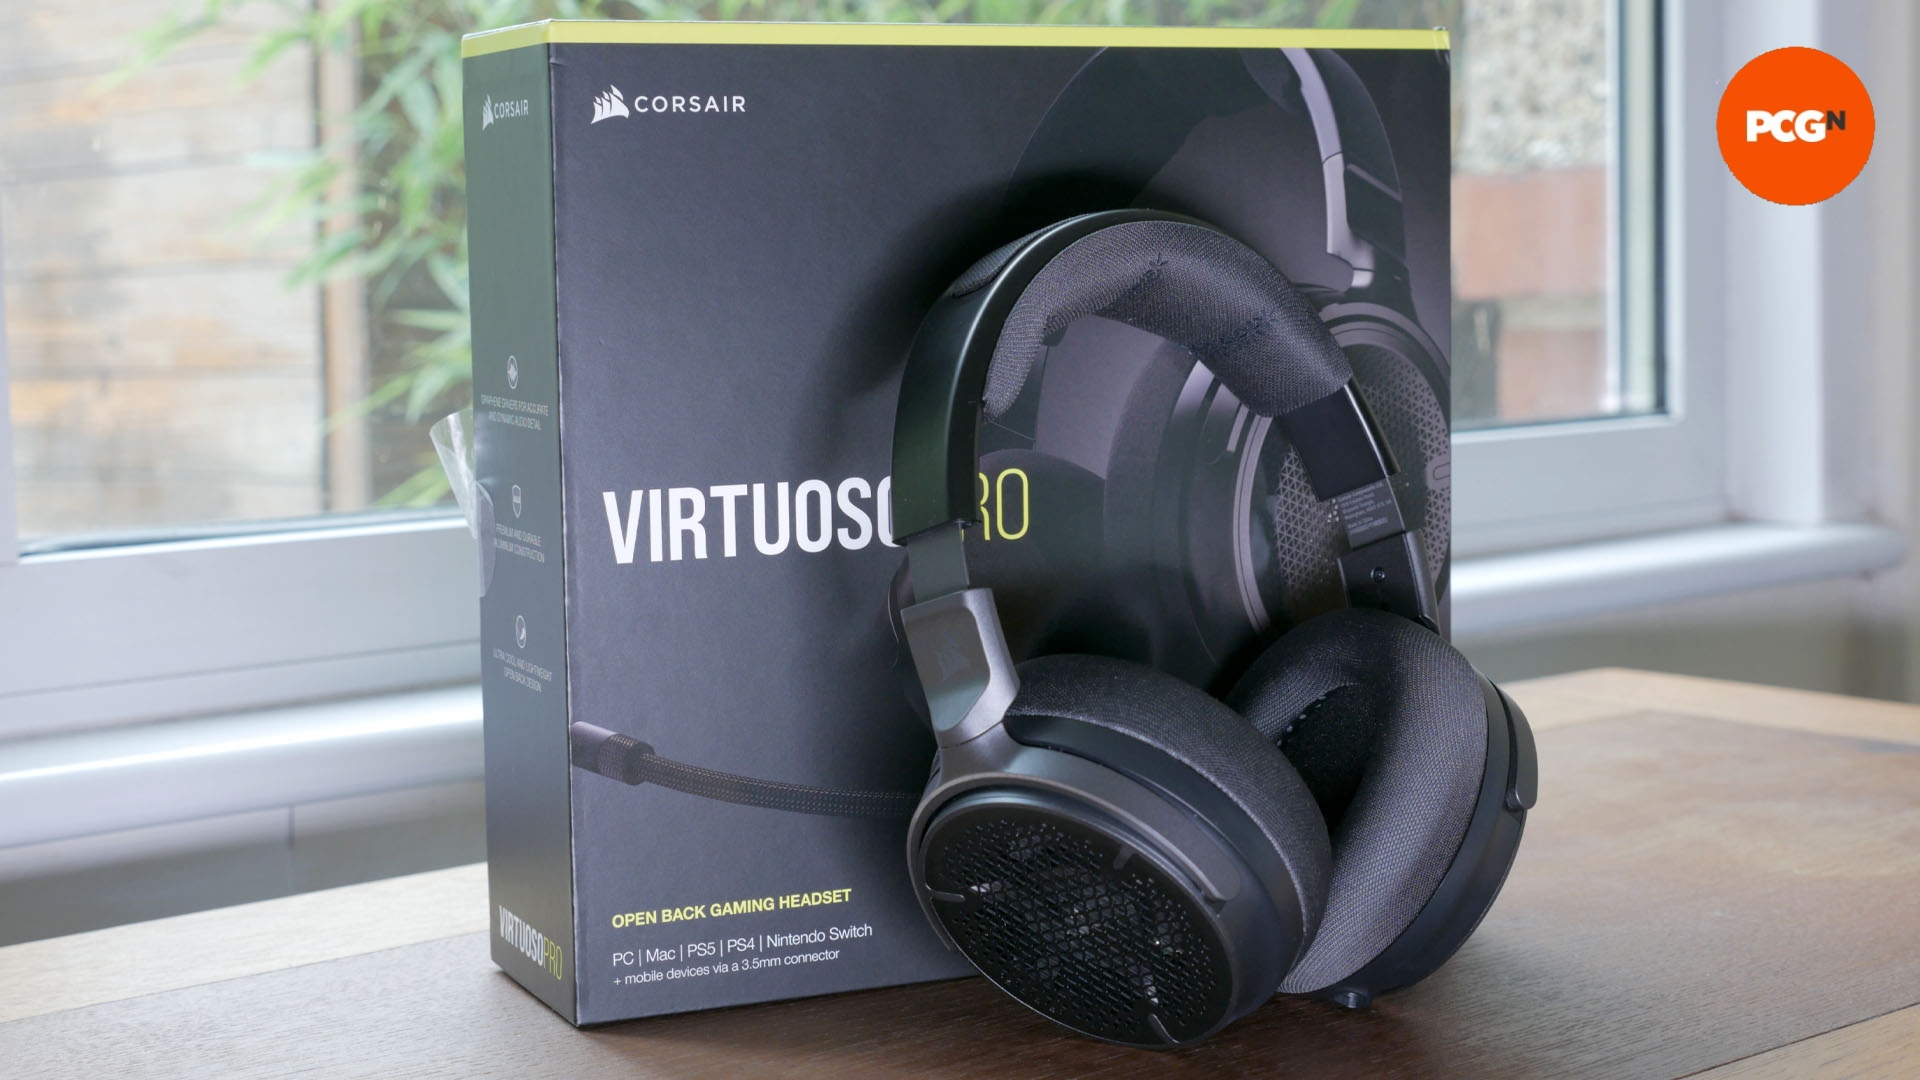 Corsair Virtuoso Pro review image showing the headset leaning against its box.